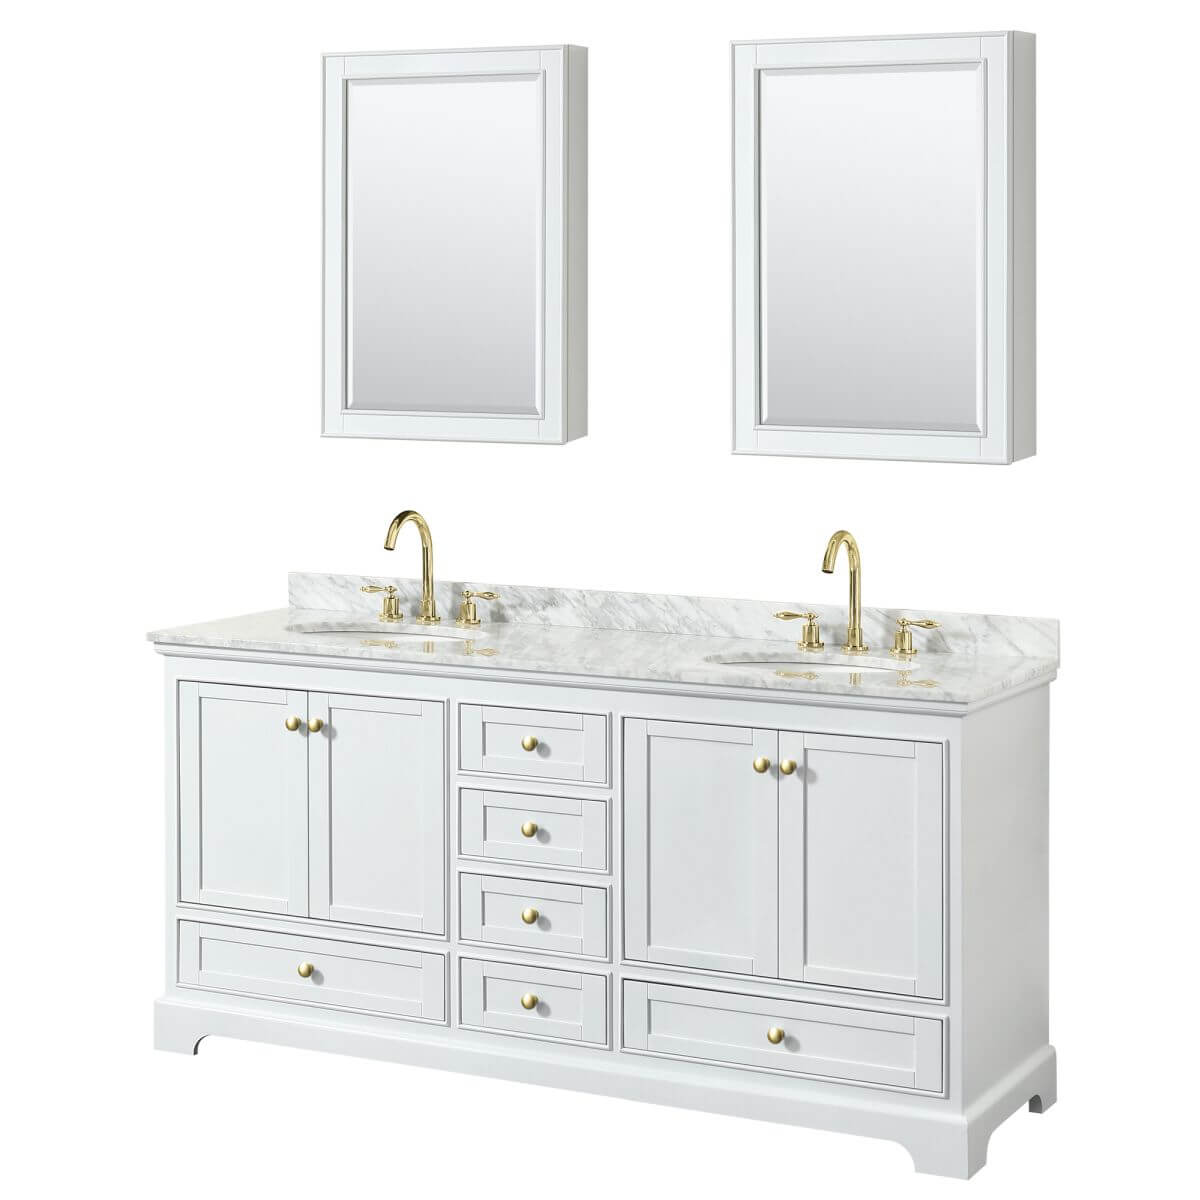 Wyndham Collection Deborah 72 inch Double Bathroom Vanity in White with White Carrara Marble Countertop, Undermount Oval Sinks, Brushed Gold Trim and Medicine Cabinets - WCS202072DWGCMUNOMED